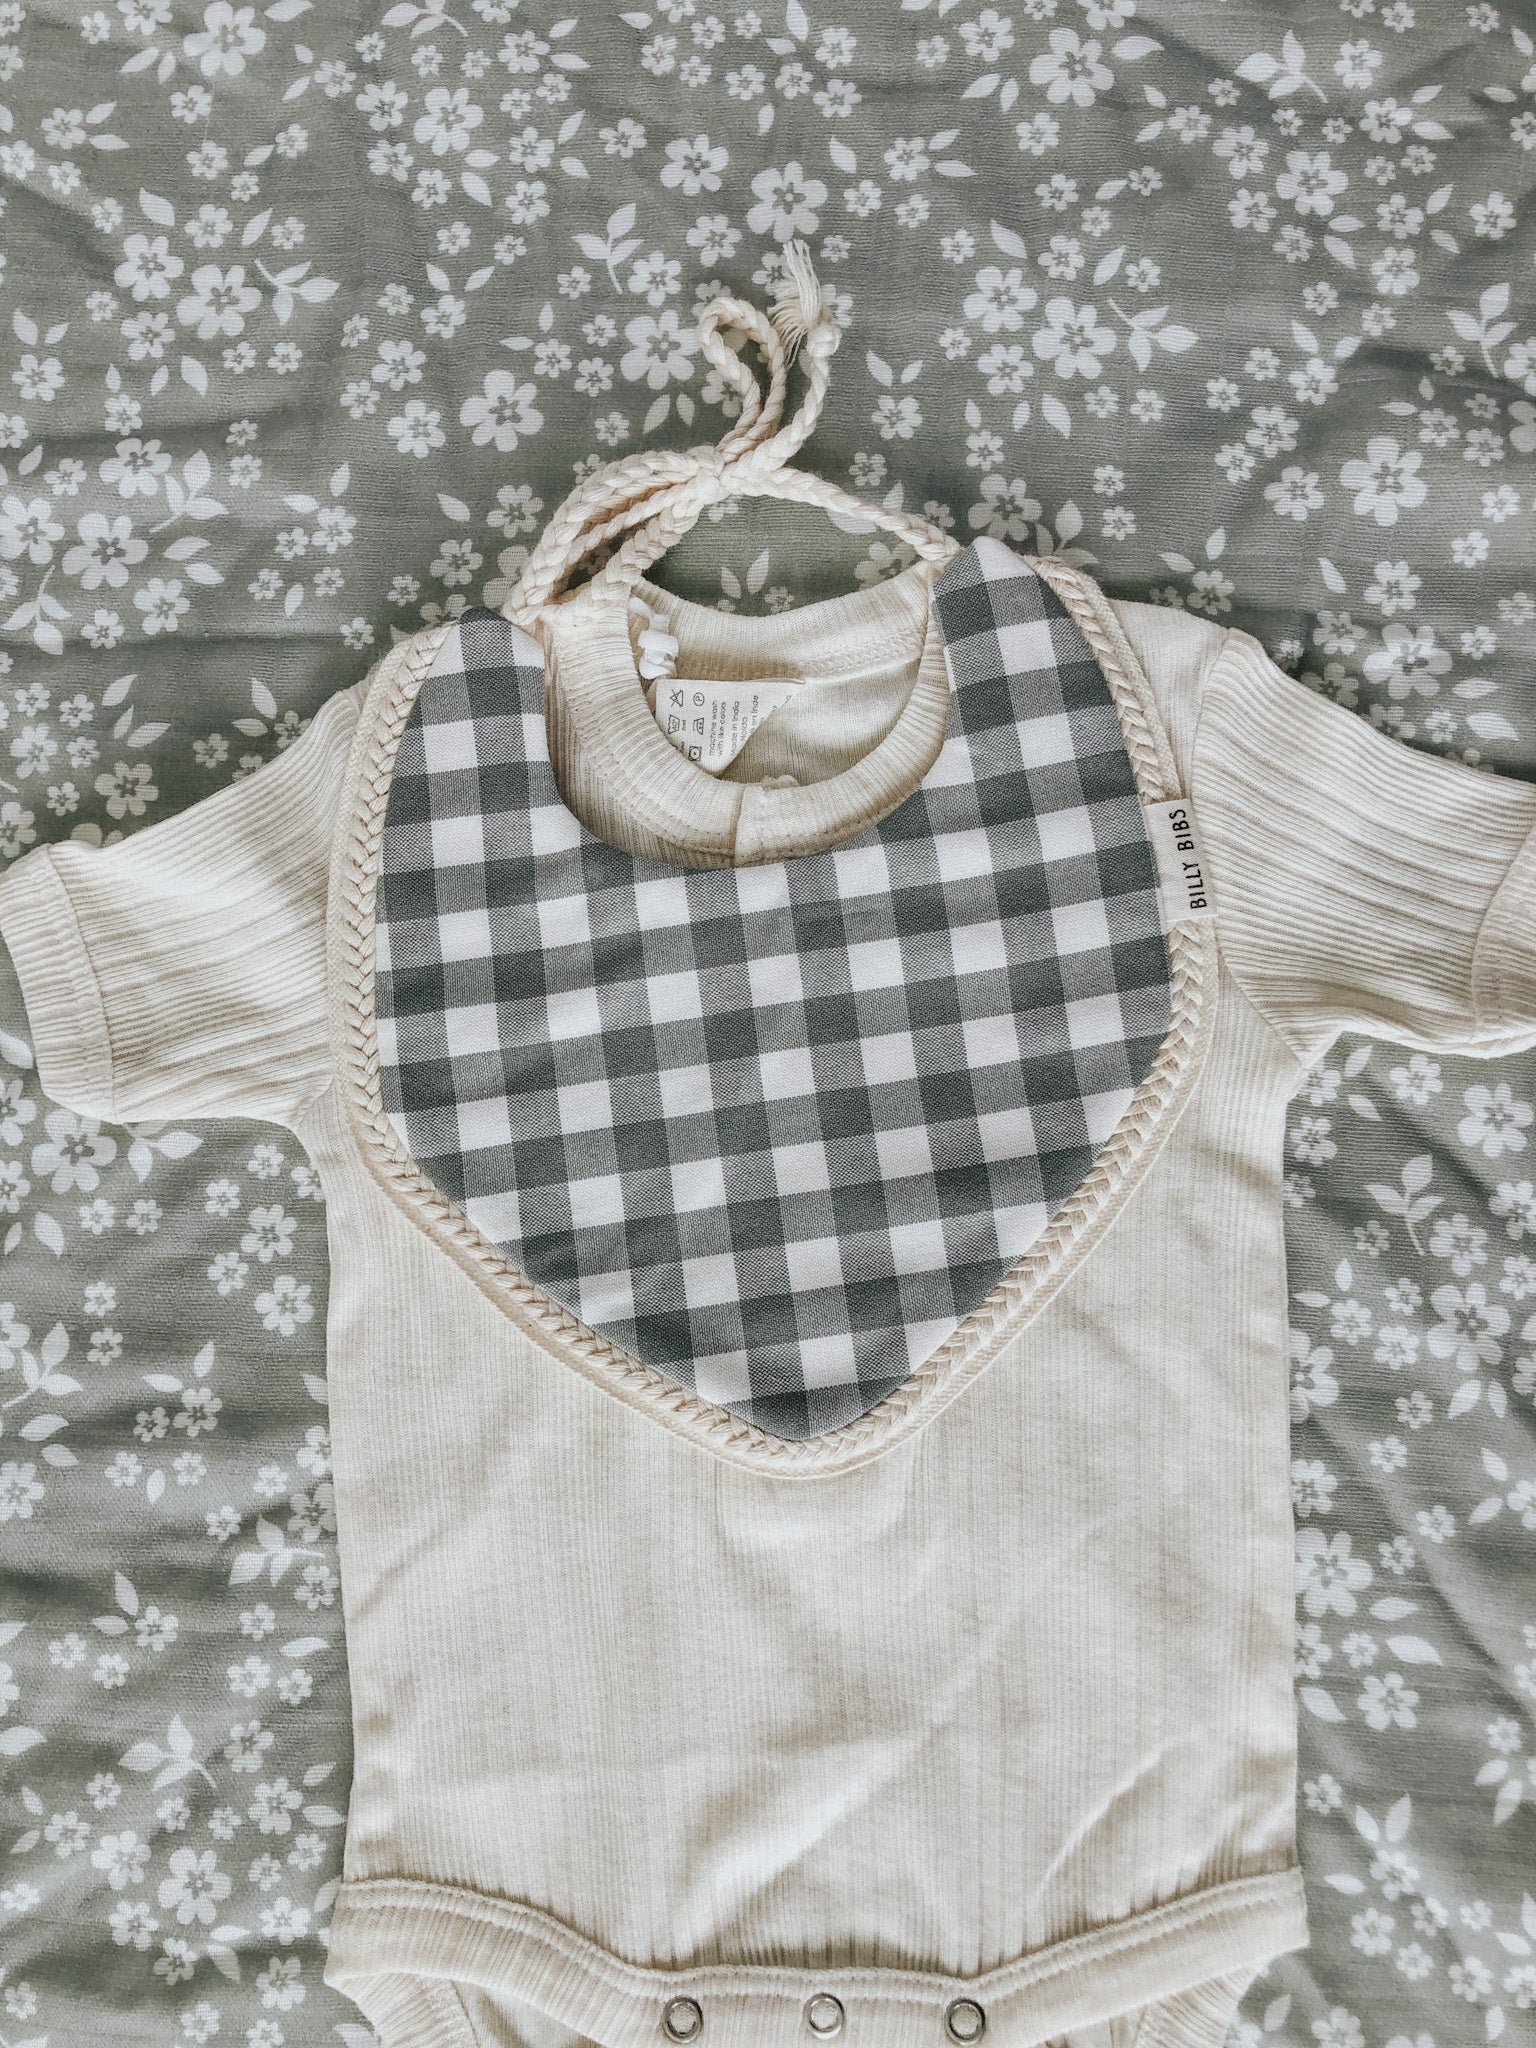 billy-bibs-baby-outfit4